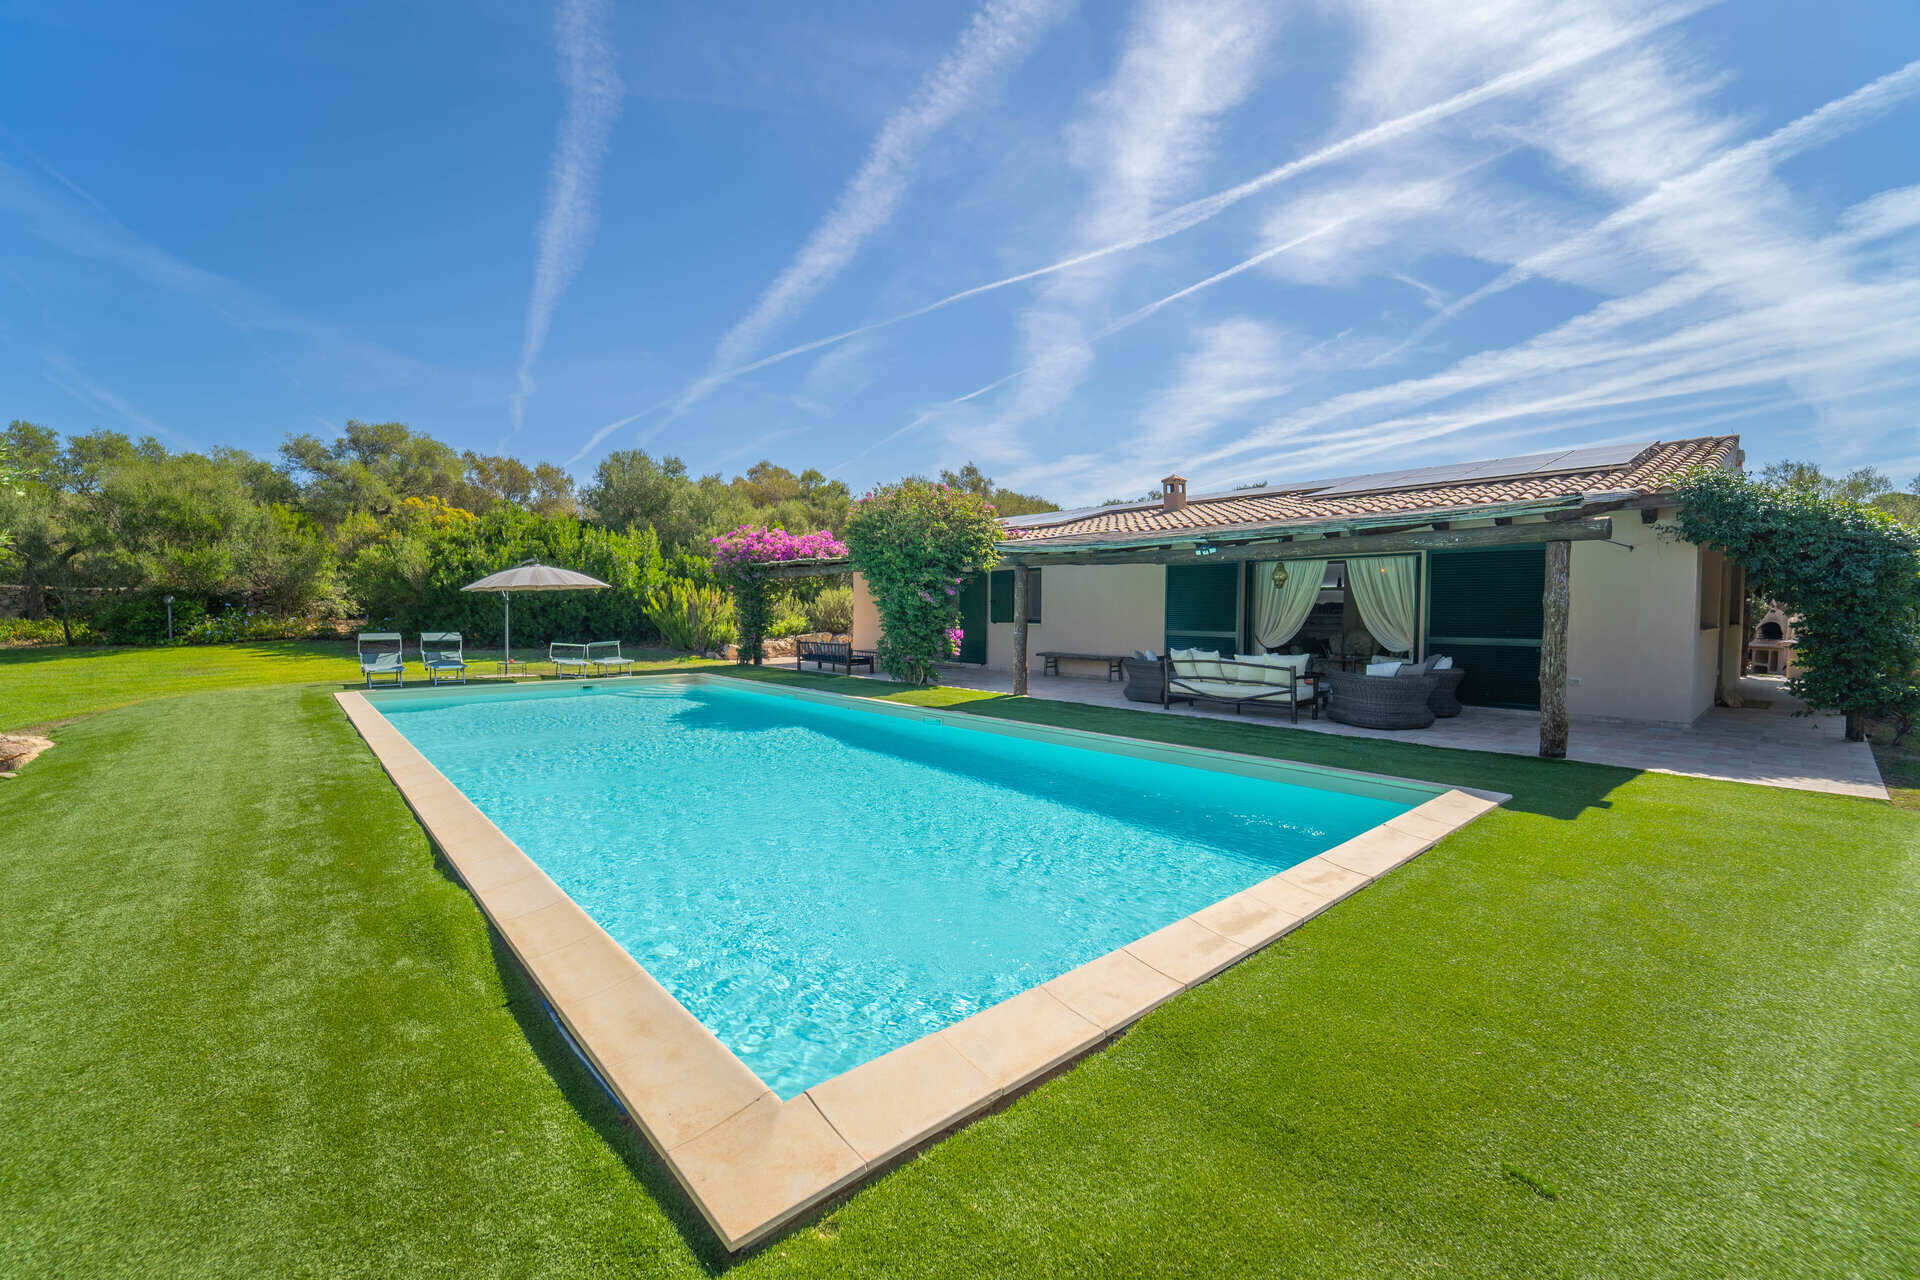 Luxurious villa nestled in the green countryside of the Costa Smeralda